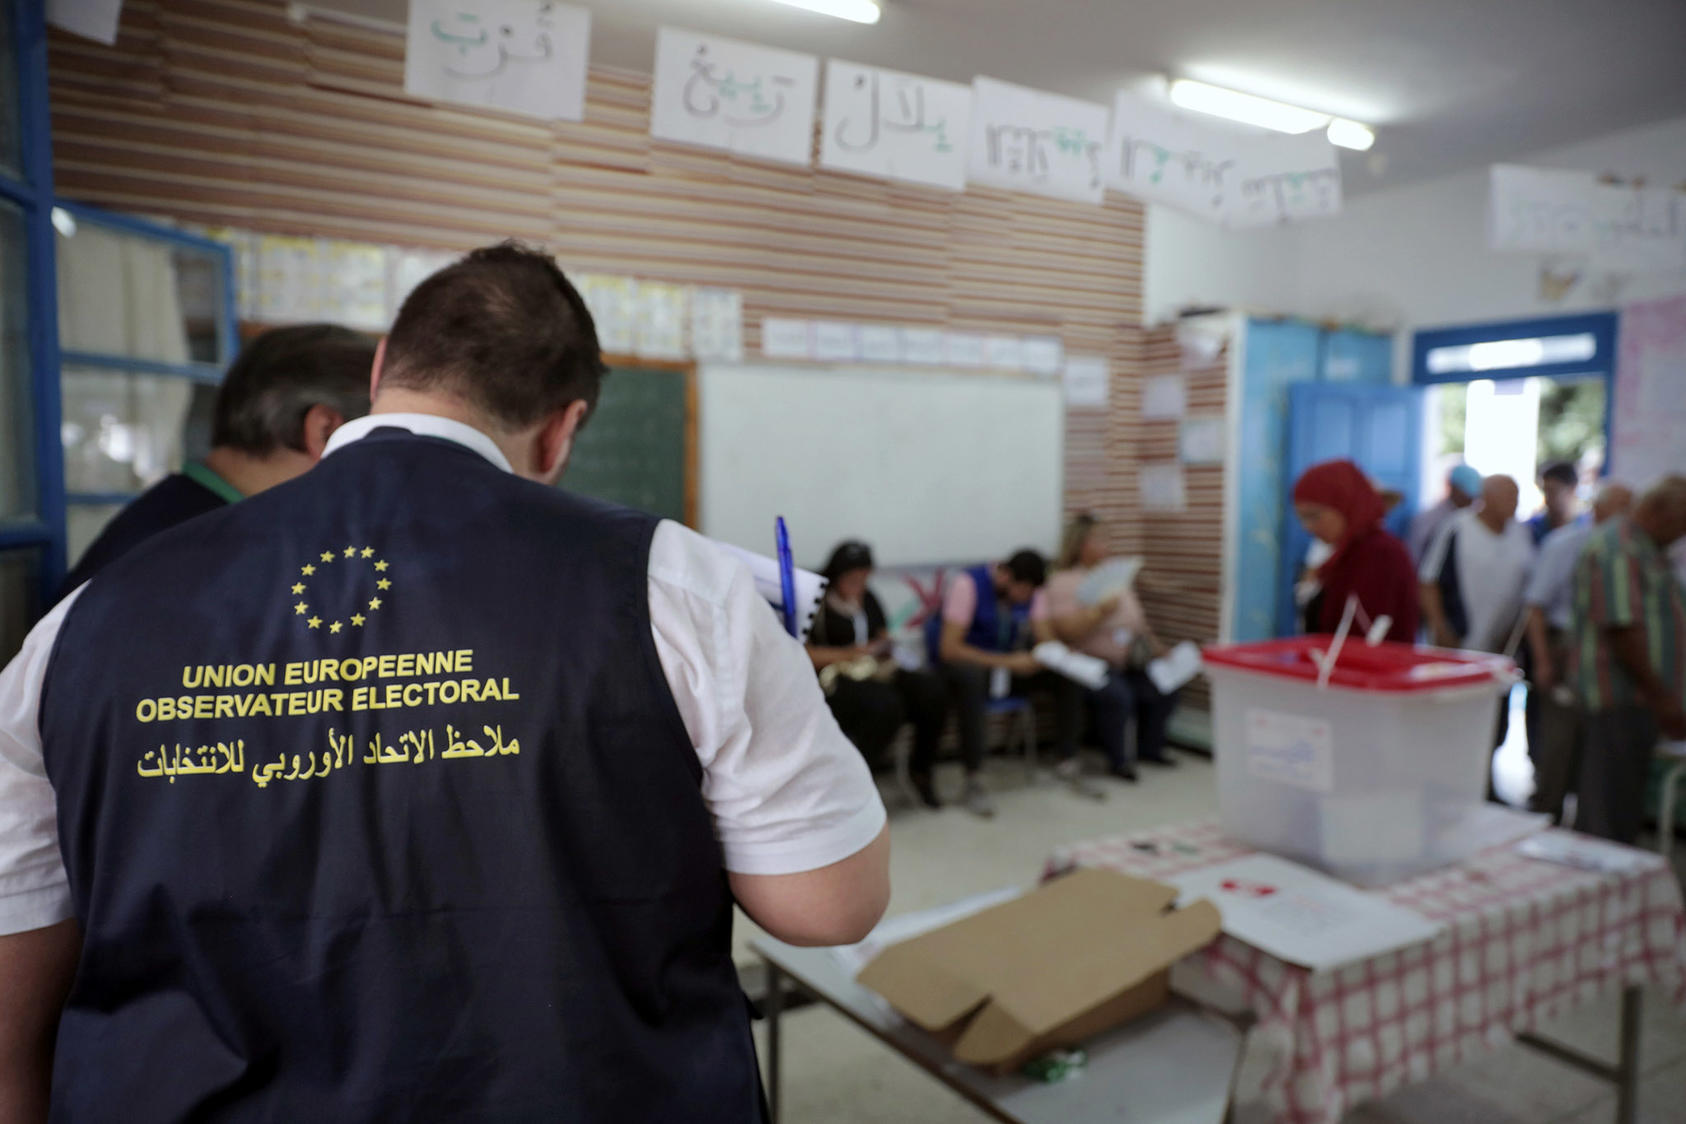 Observers from the European Union monitor the election process inside a polling station outside Tunis during the first round of the presidential election on September 15, 2019. (Mosa’ab Elshamy/AP)